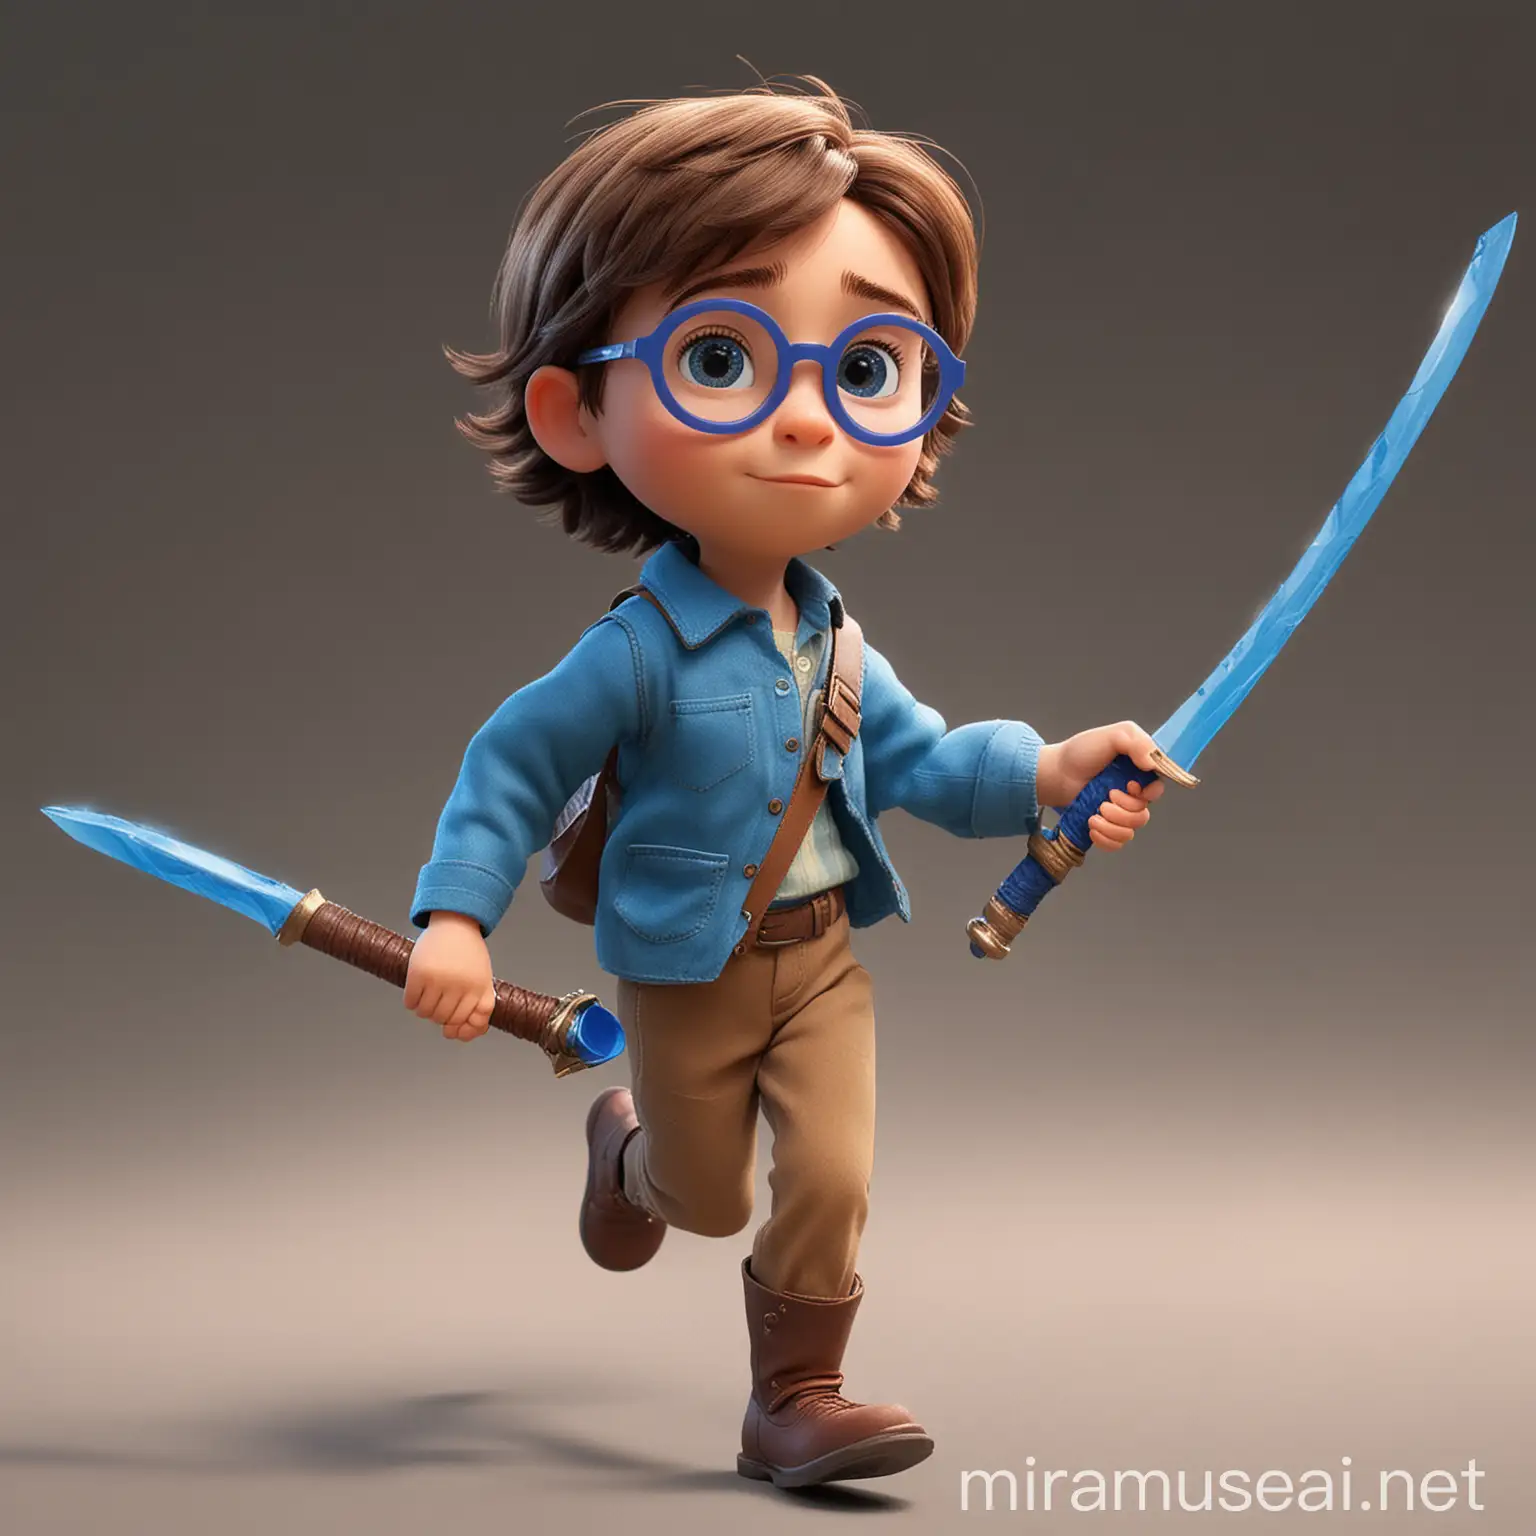 Energetic 6YearOld Boy with Round Blue Glasses Wielding a Plastic Sword in Pixar Style